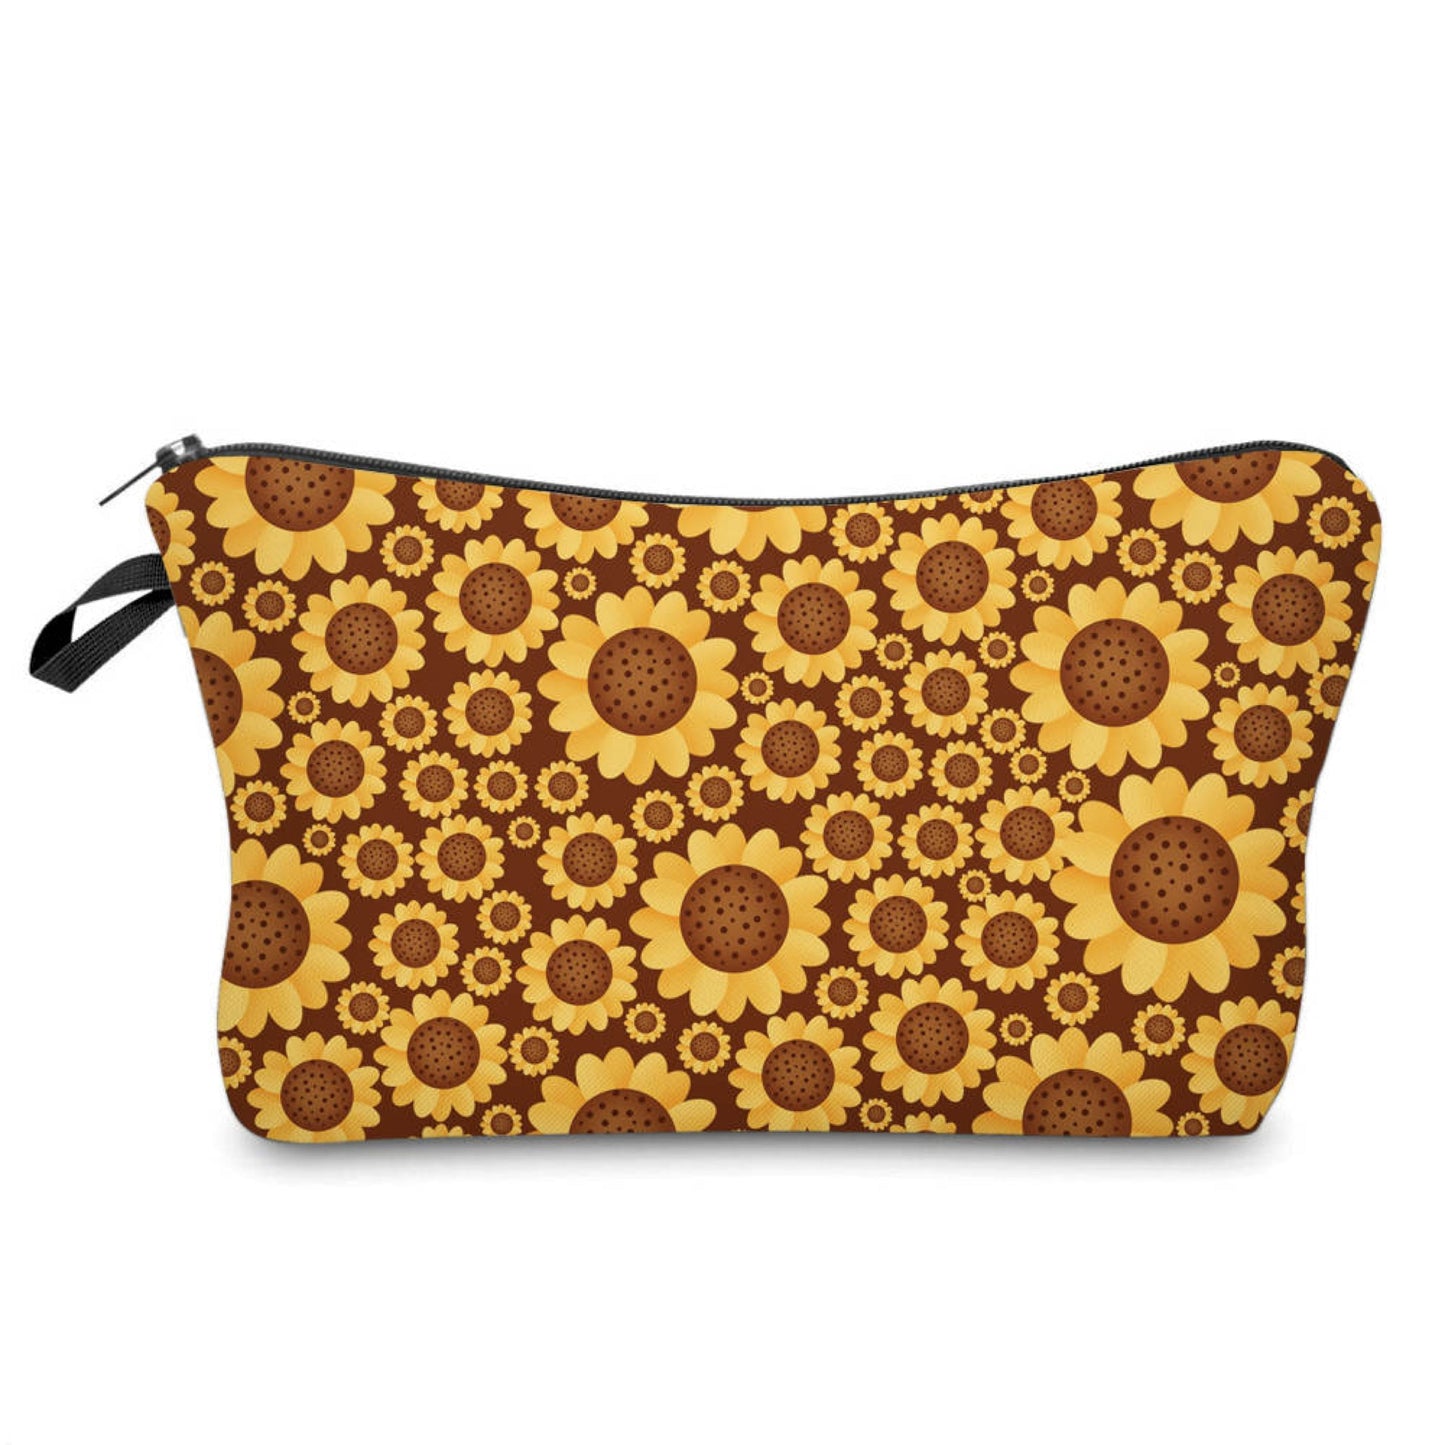 Pouch - Sunflowers, Brown Background